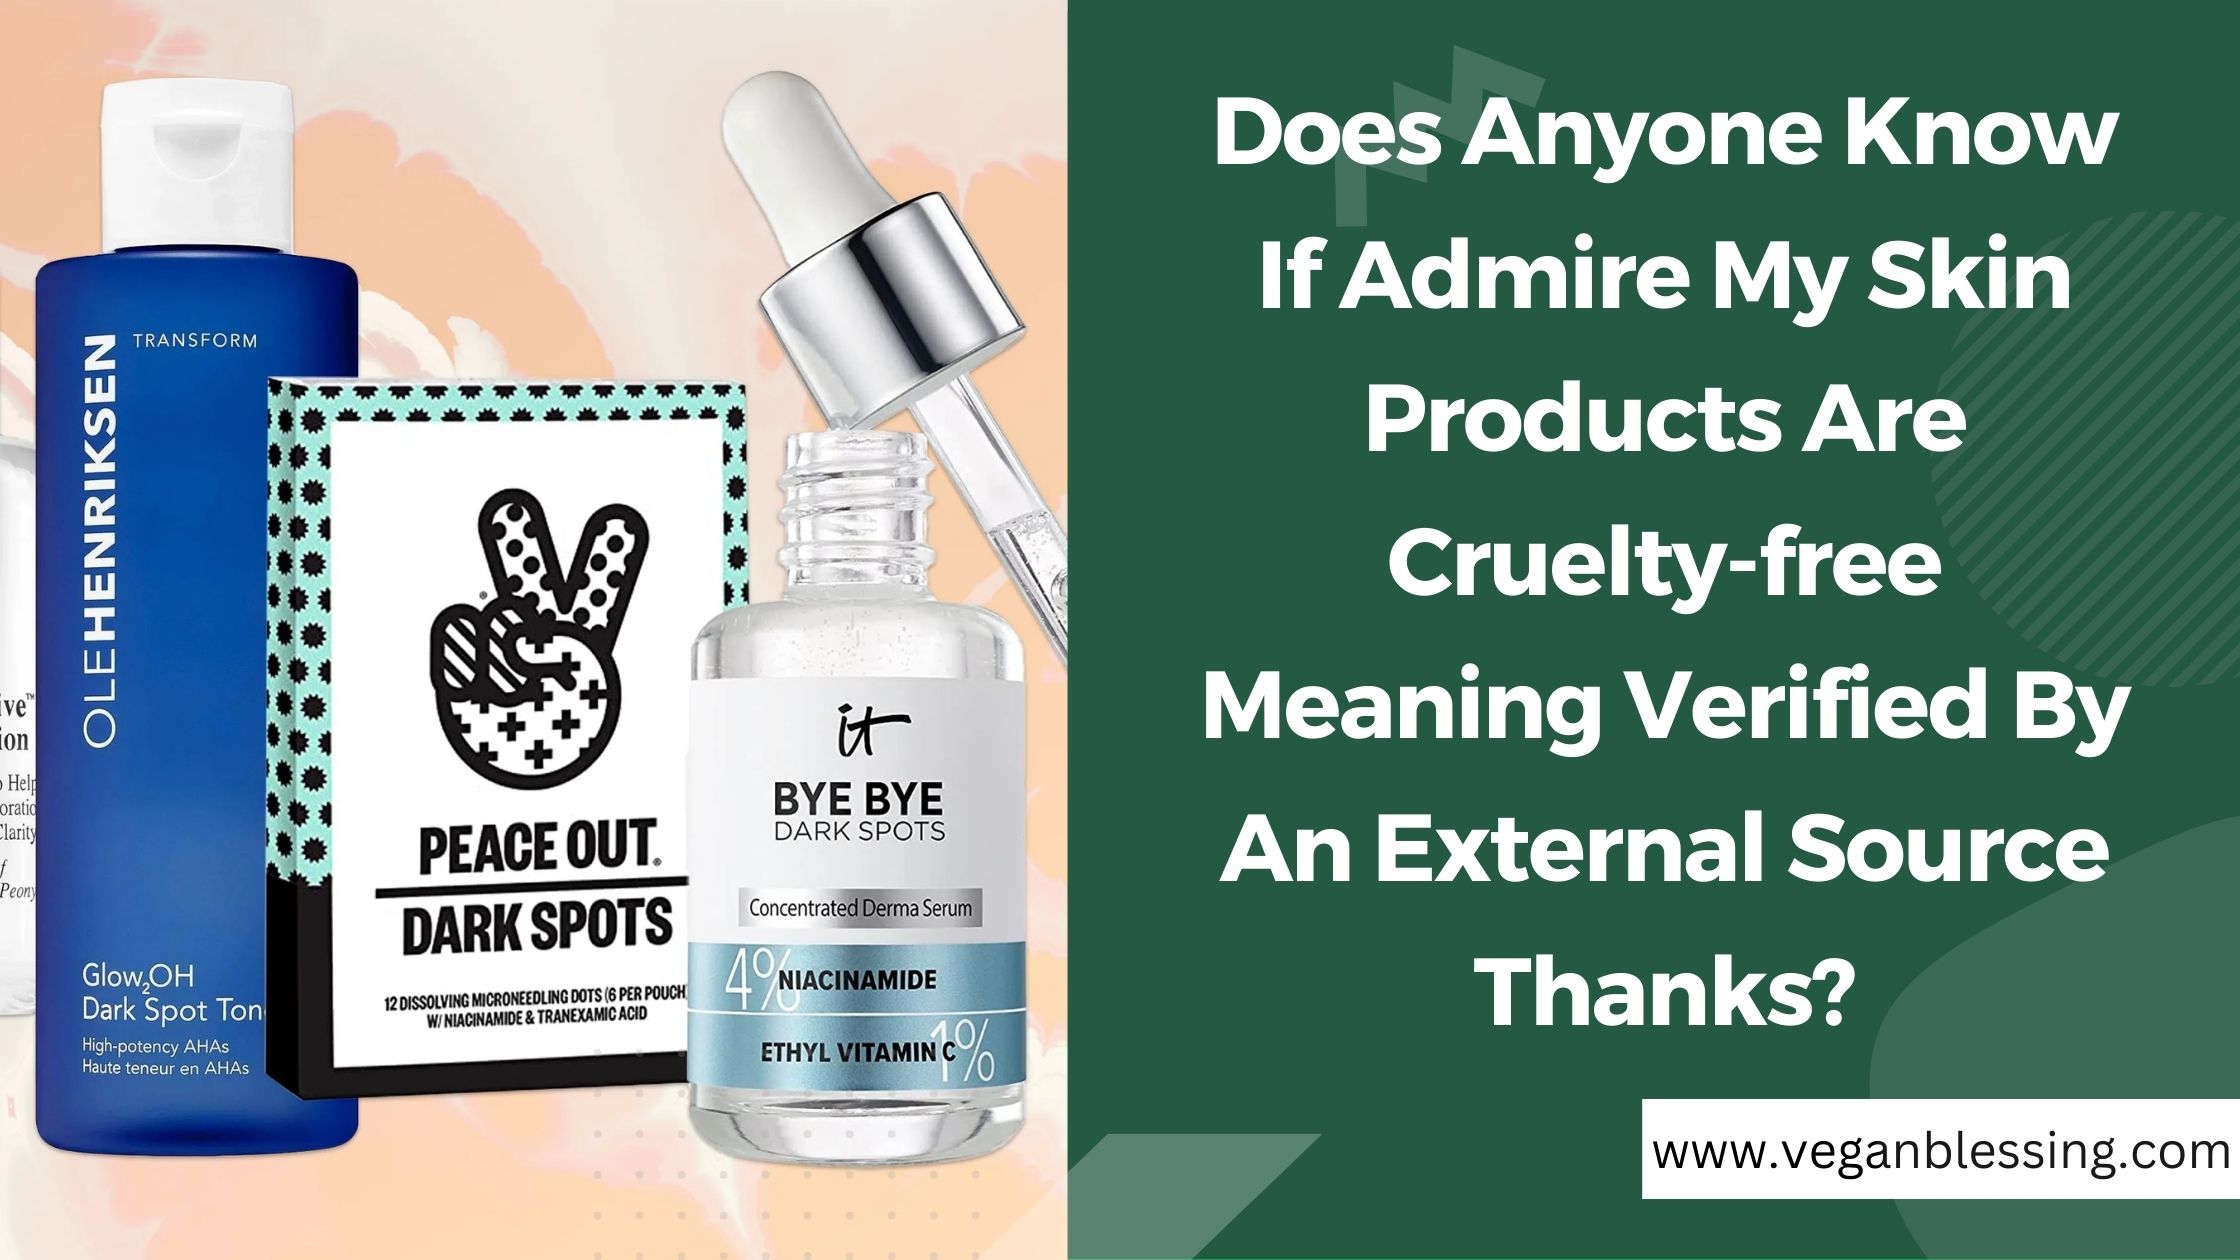 Does Anyone Know If Admire My Skin Products Are Cruelty-free Meaning Verified By An External Source Thanks? Does Anyone Know If Admire My Skin Products Are Cruelty free Meaning Verified By An External Source Thanks